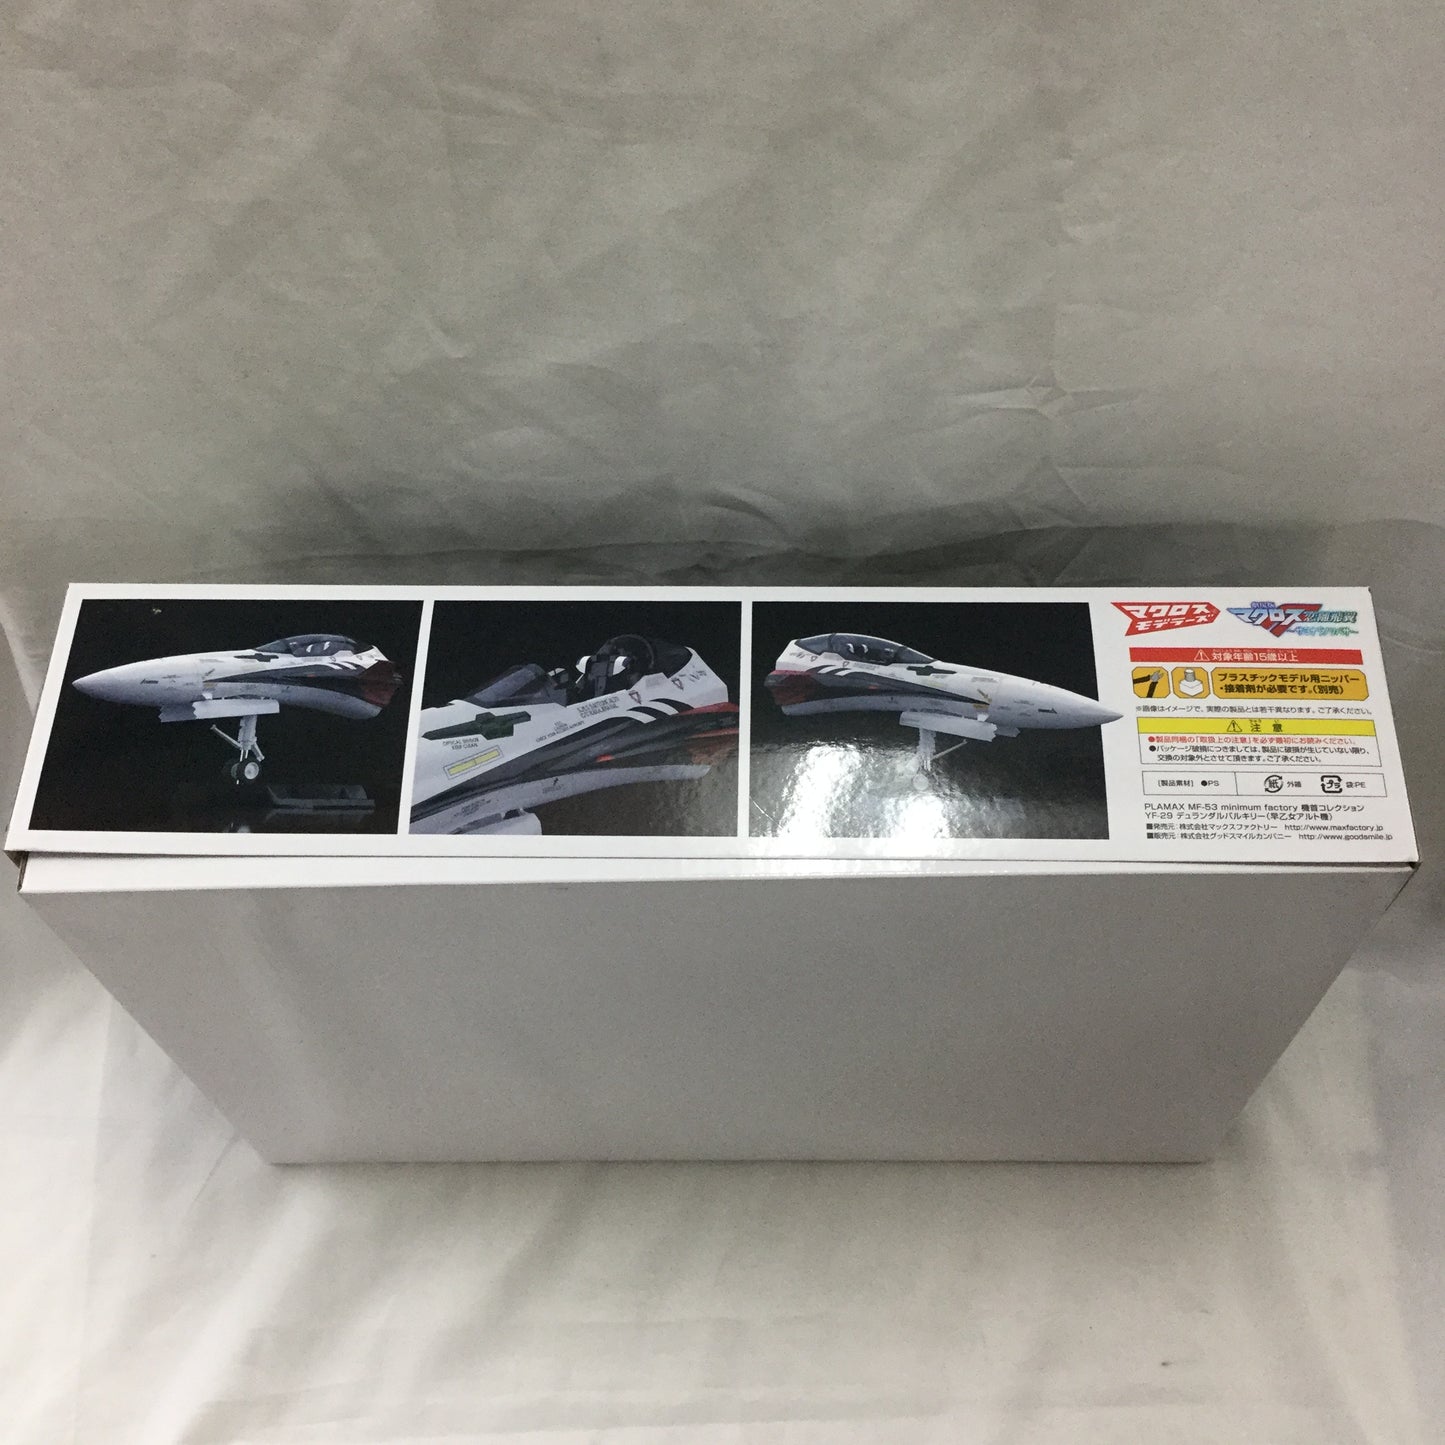 PLAMAX MF-53 minimum factory Movie Macross Frontier Fighter Nose Collection YF-29 Durandal Valkyrie (Alto Saotome Fighter), animota